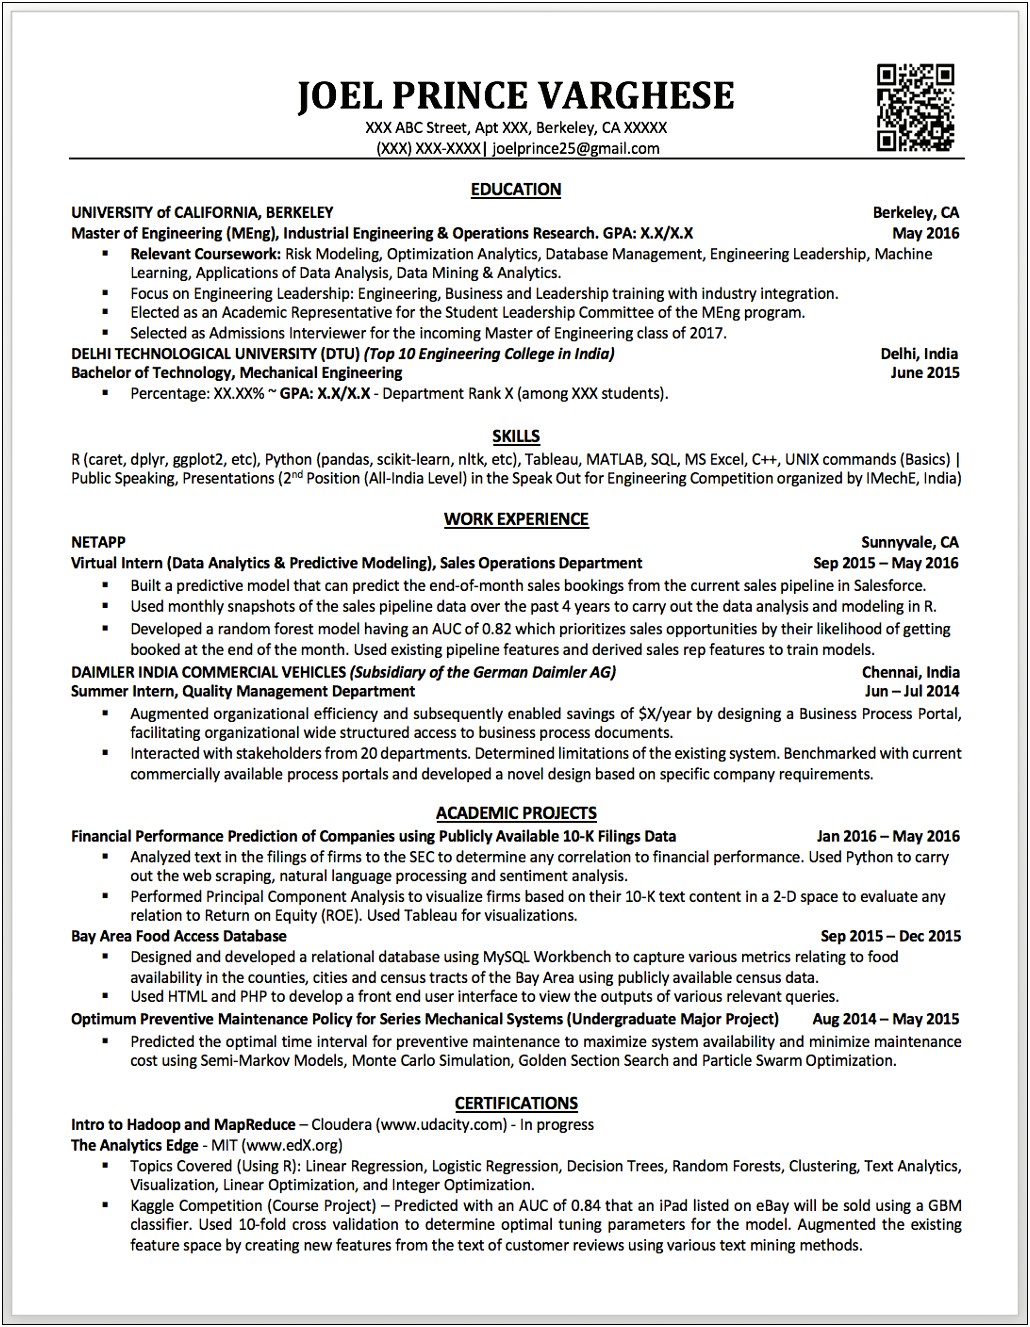 Data Anlayst Resume Sample For Graduate Student